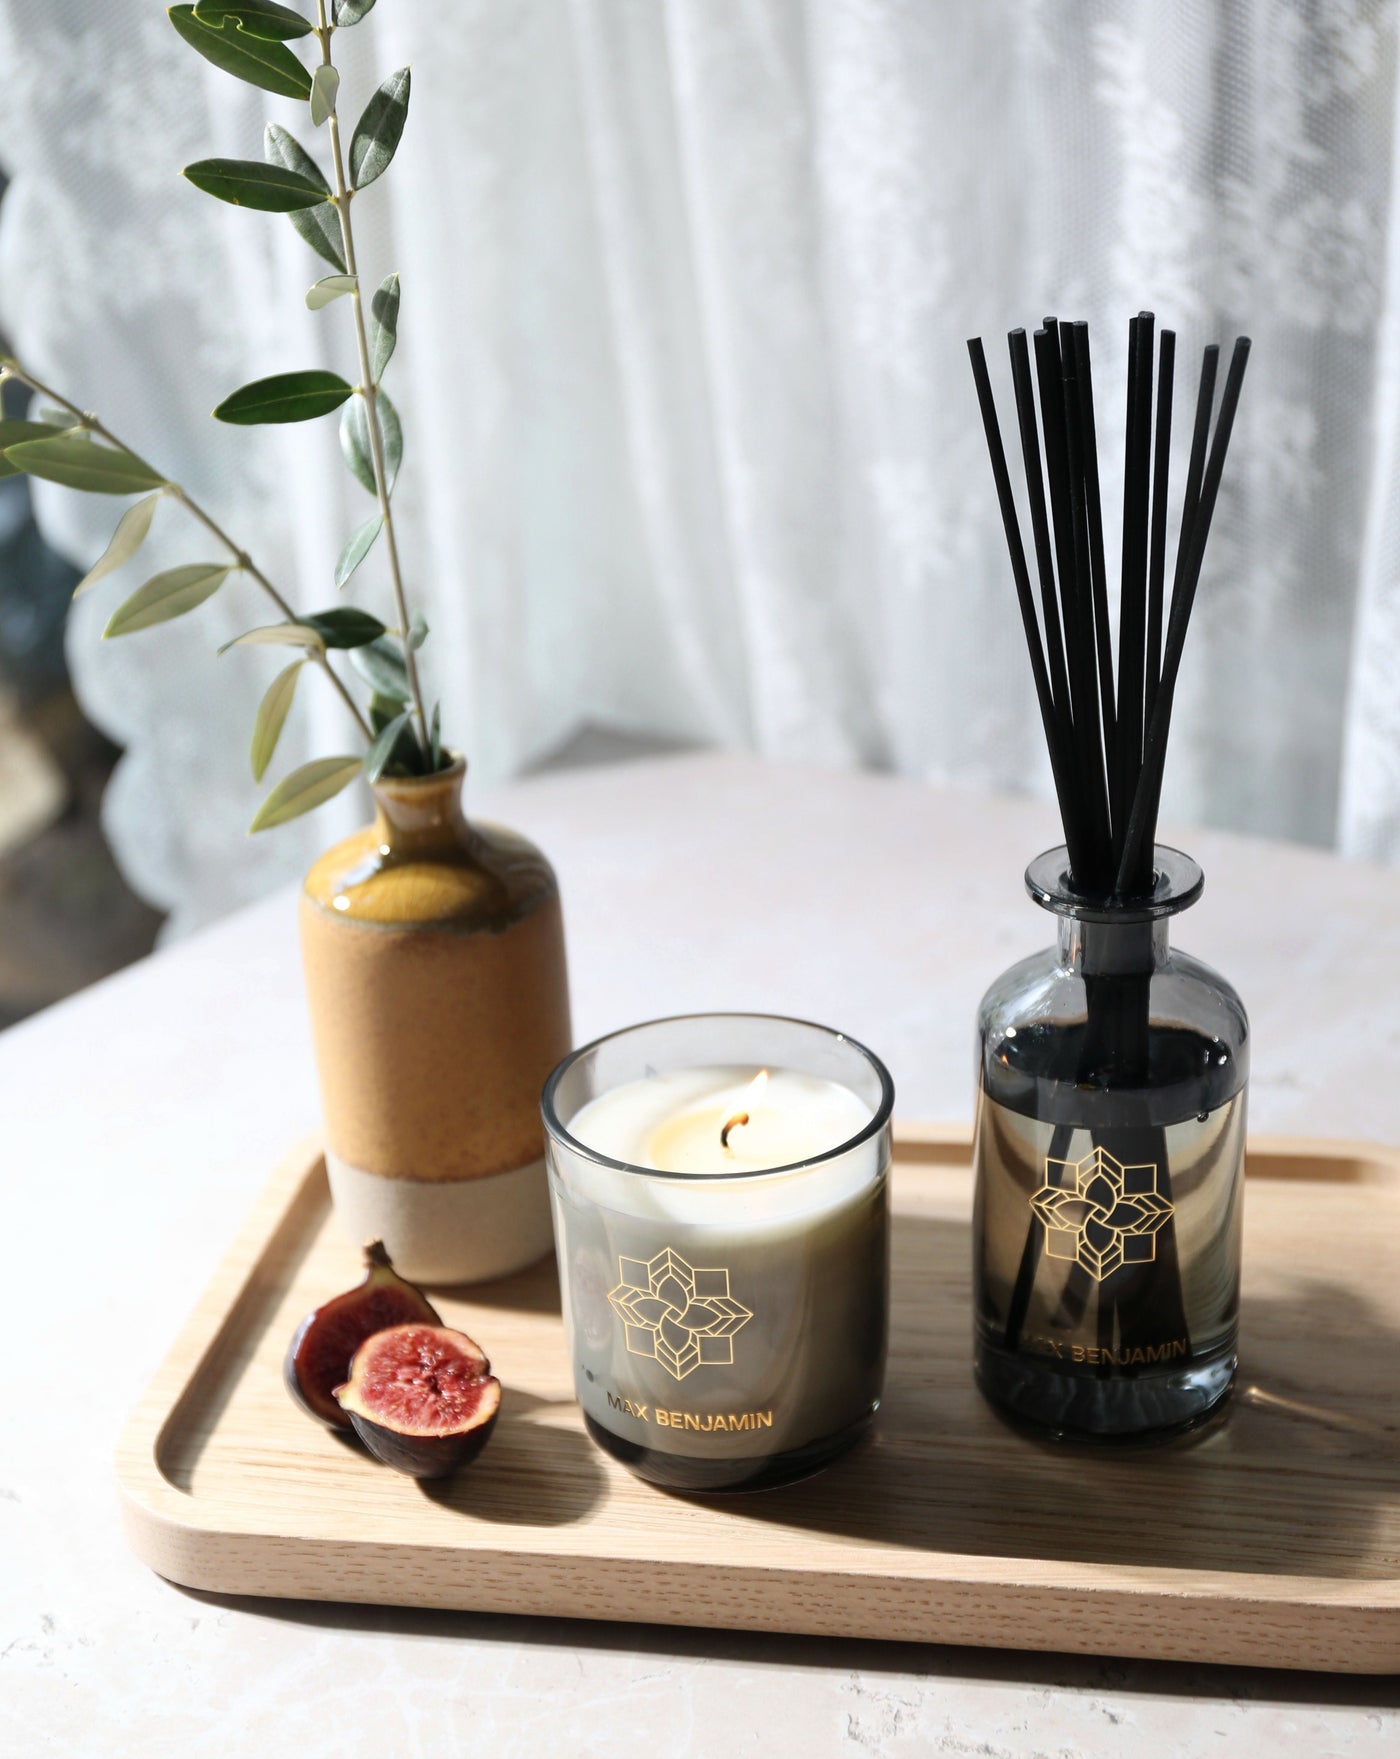 French Linen Water Candle | Max Benjamin